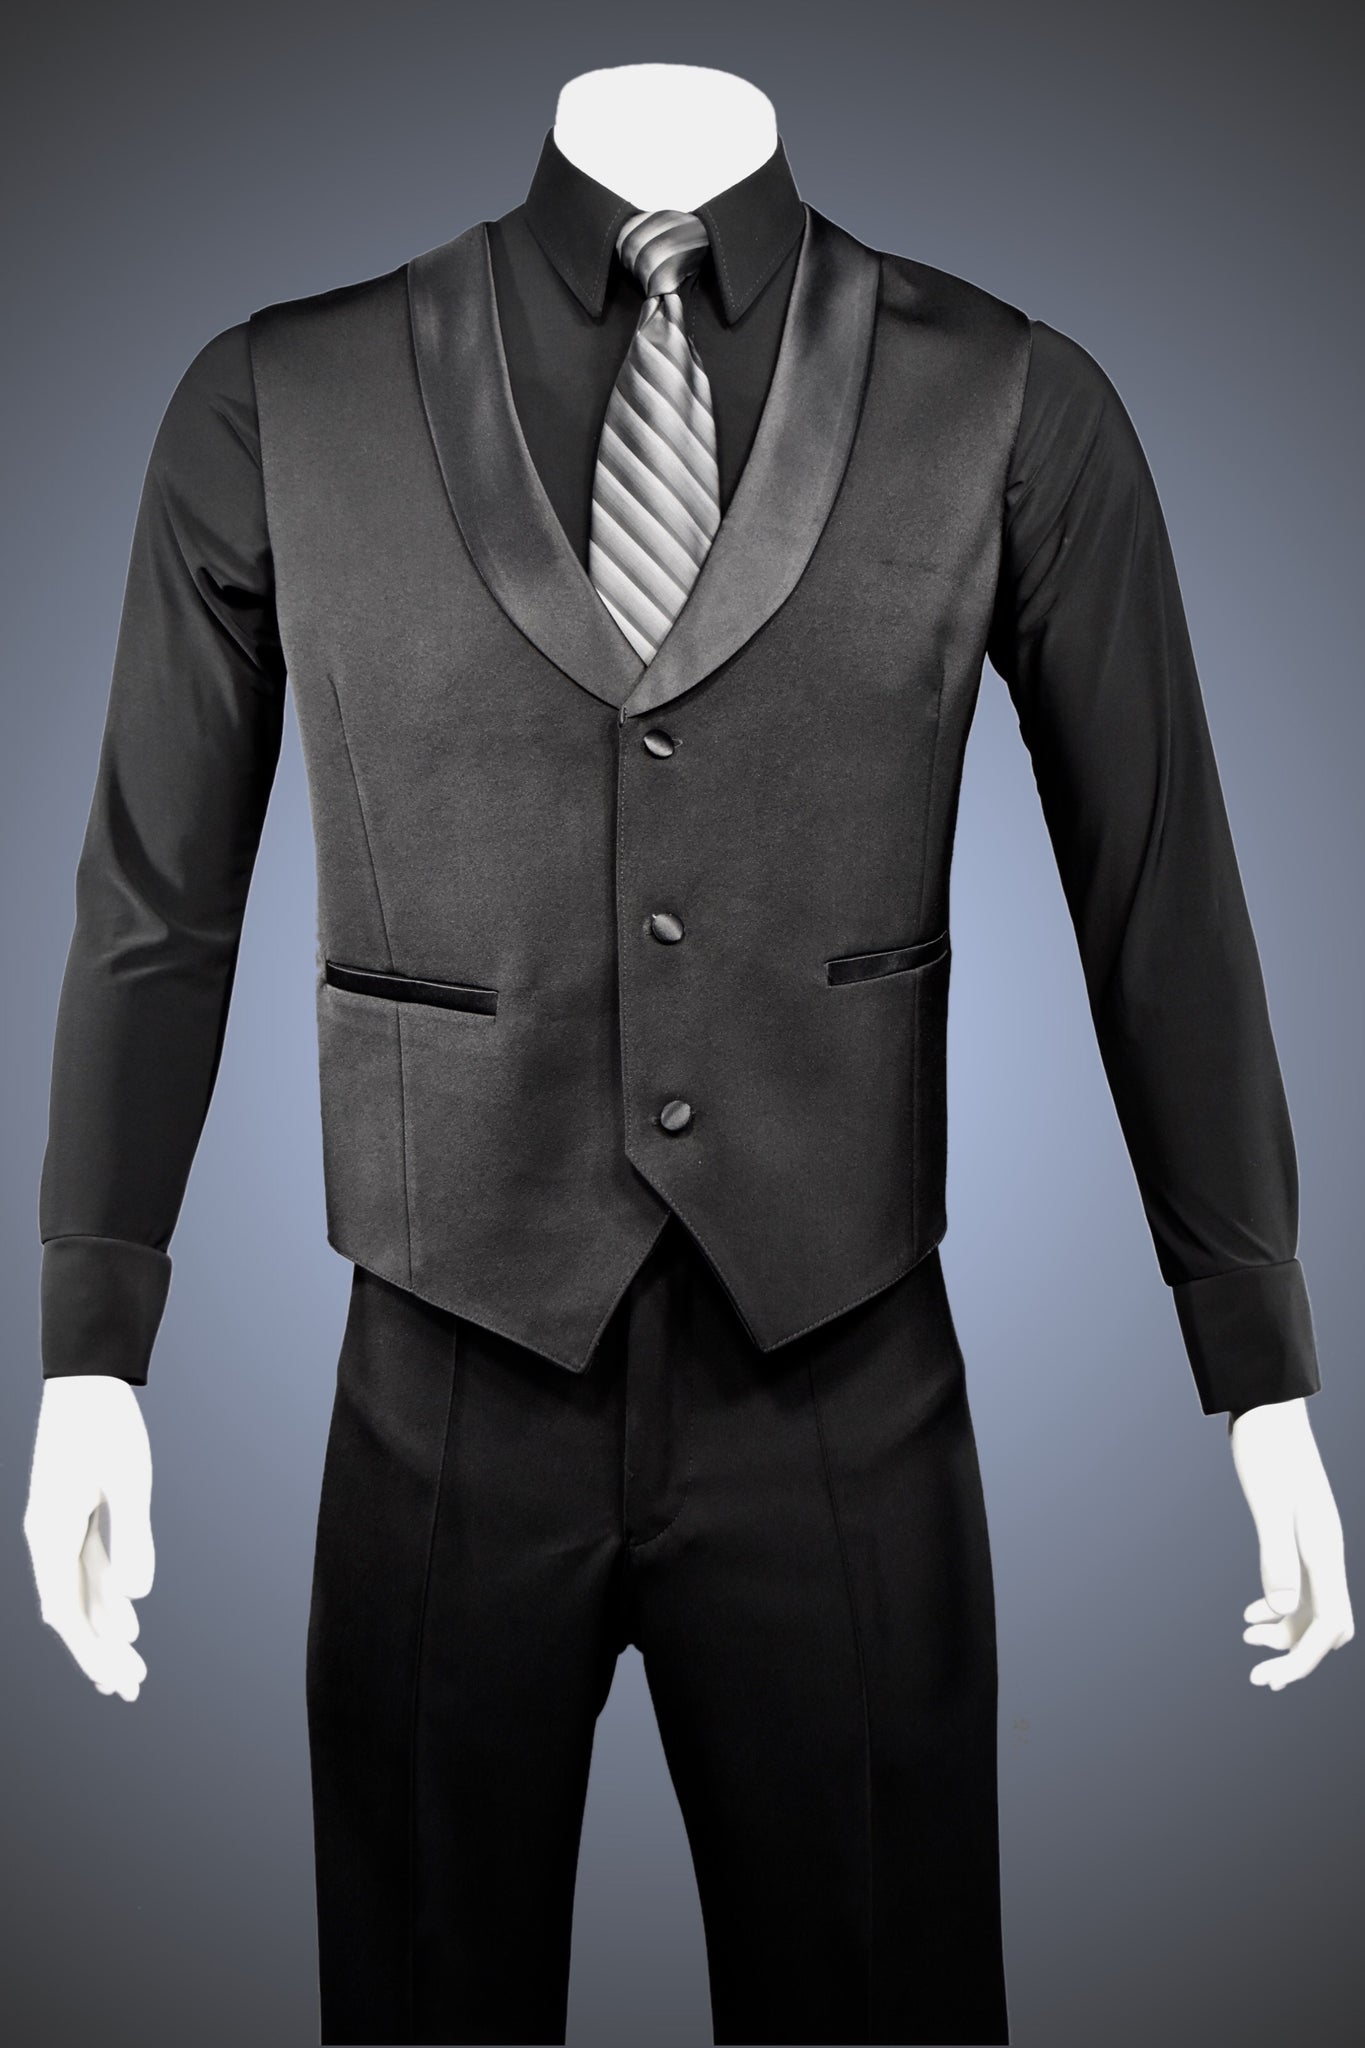 Single-Breasted Dance Vest with Classic Point Hem and Shawl Collar - Vest4 - Jacket by Randall Ready